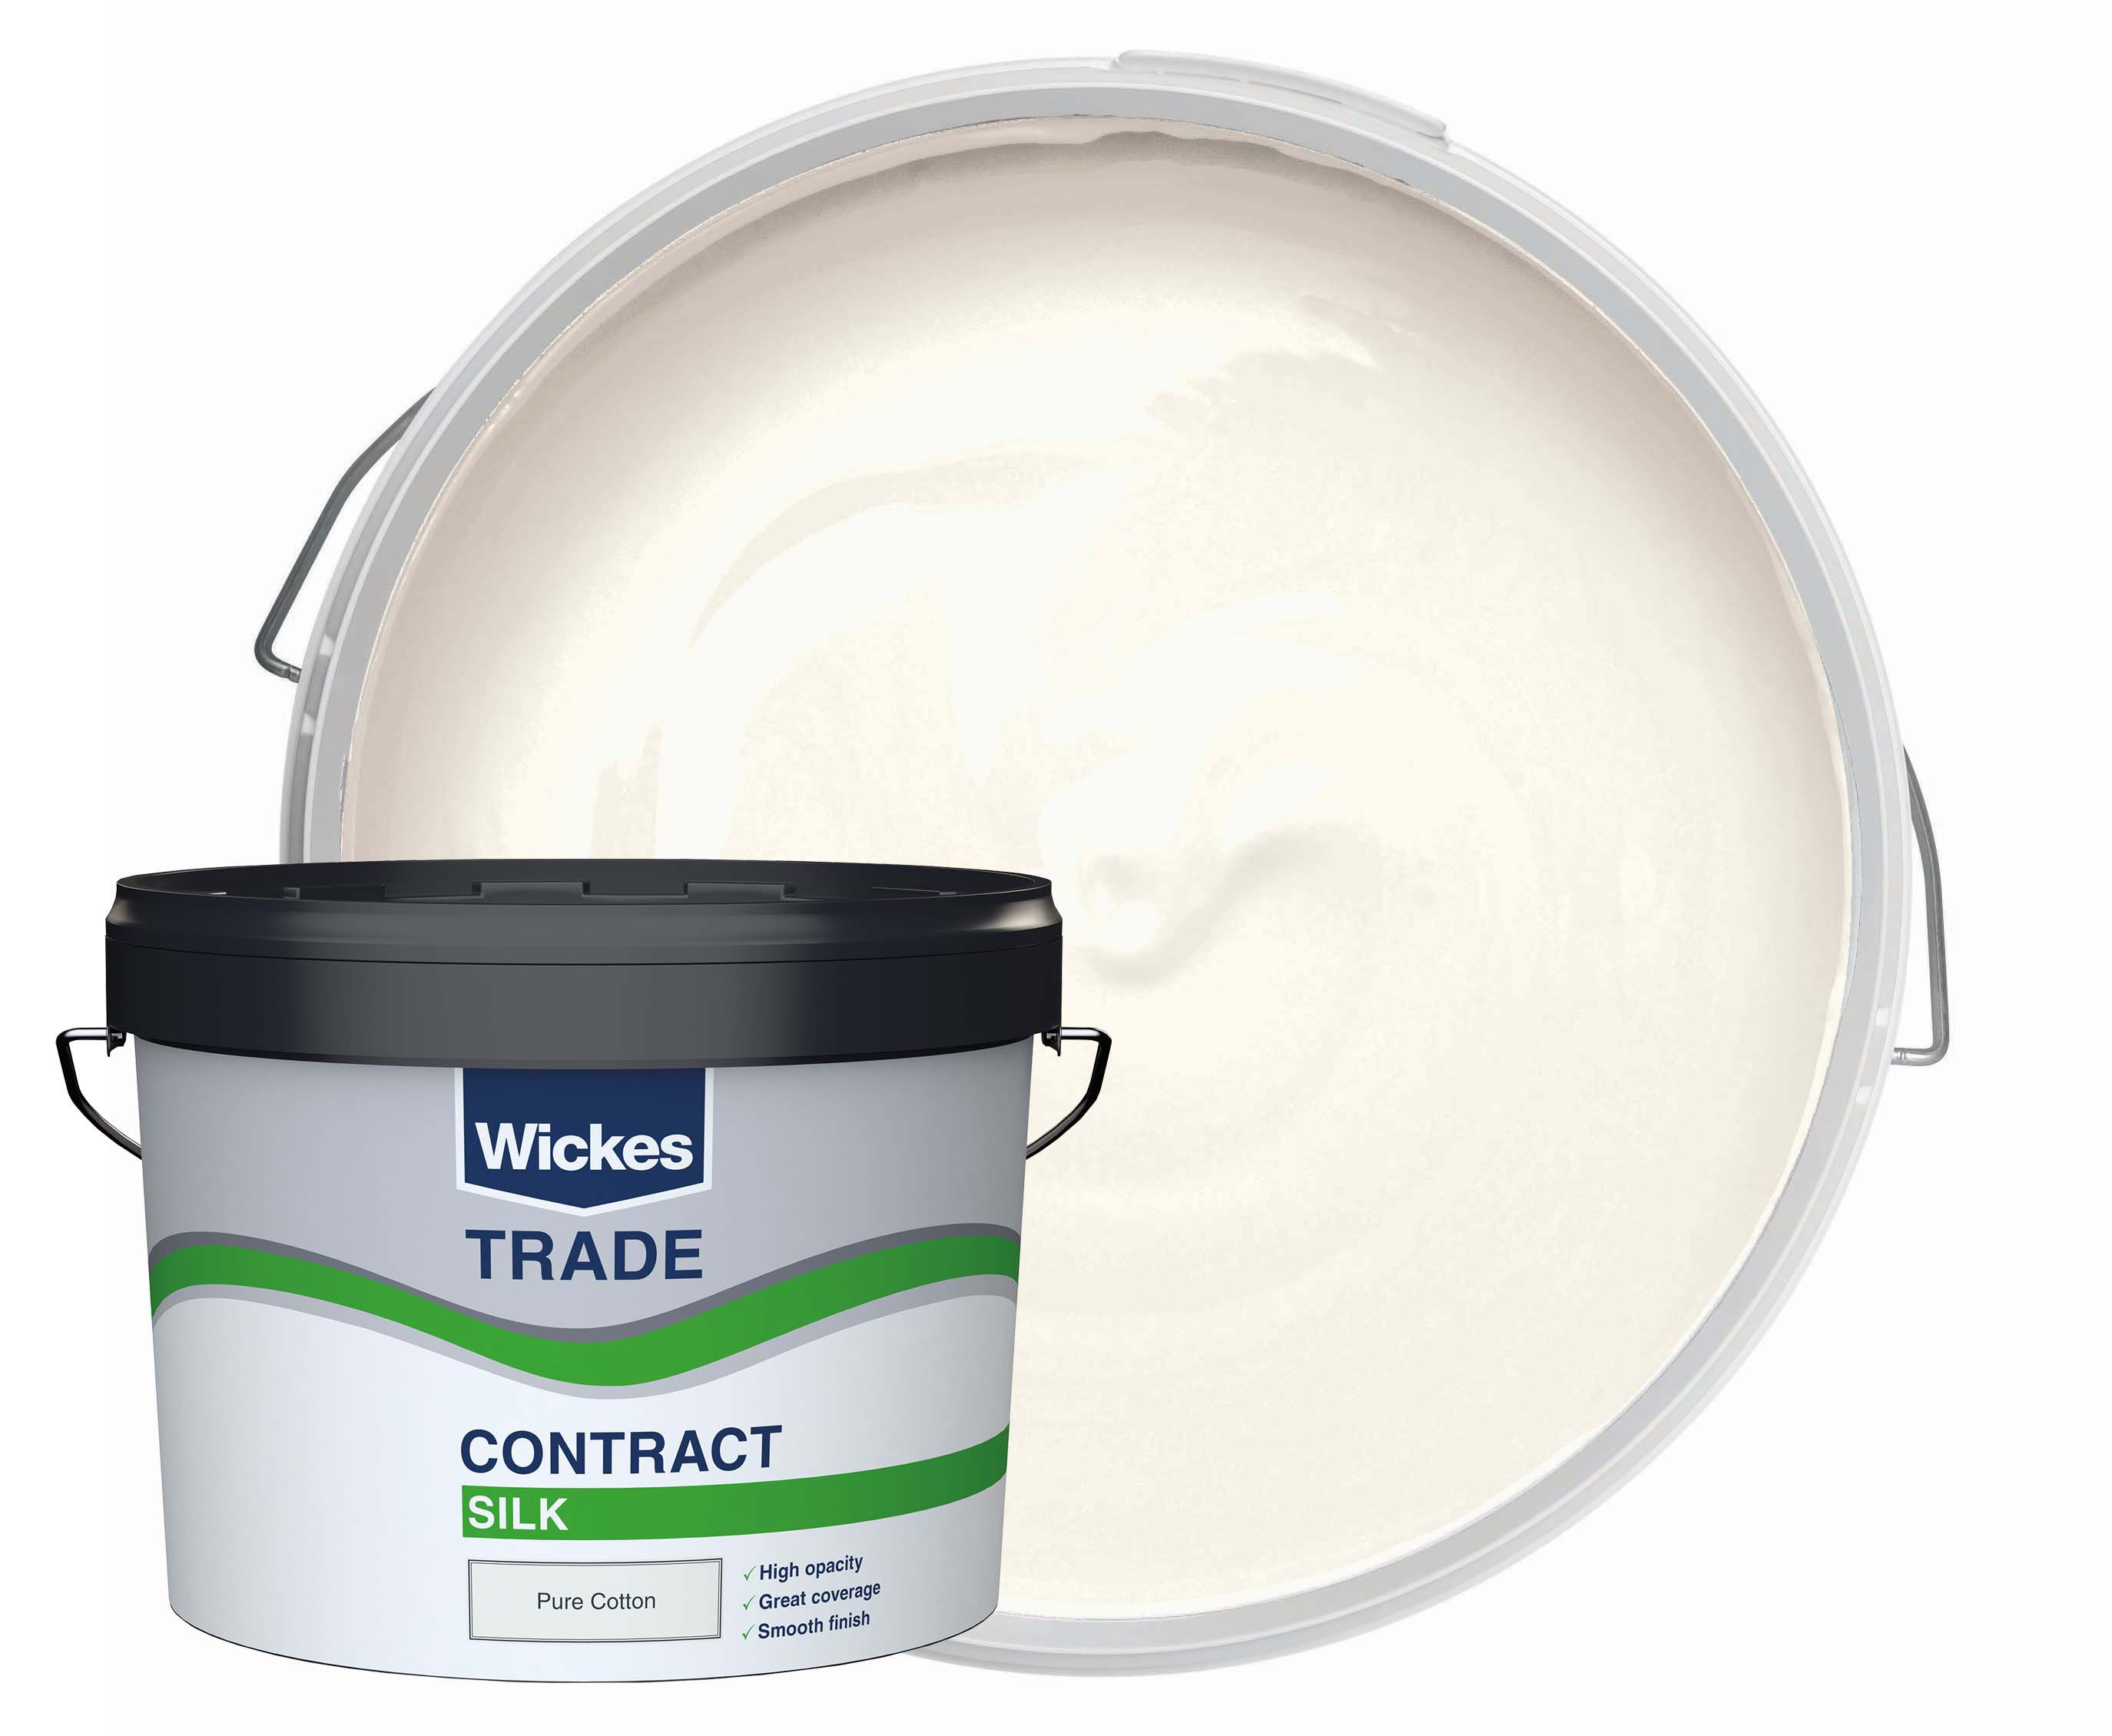 Image of Wickes Trade Contract Silk Emulsion Paint - Pure Cotton - 10L